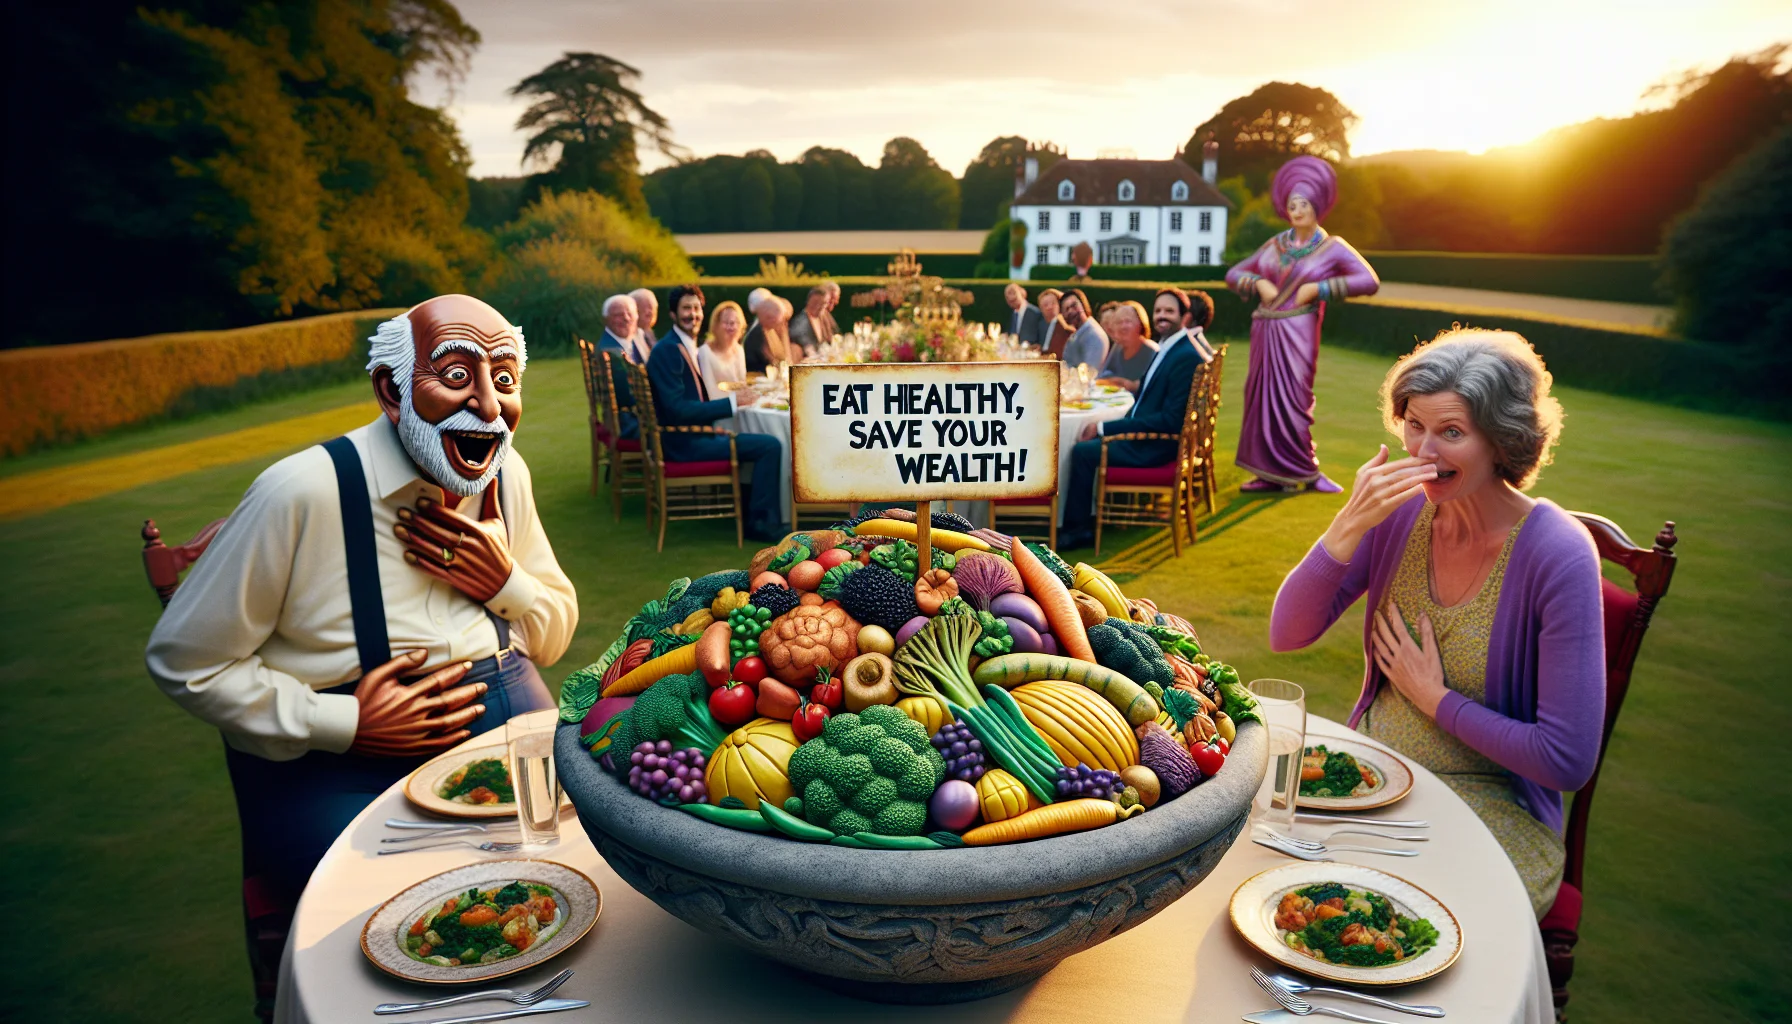 Imagine you are at a humorous garden party set in the beautiful countryside. On a lavishly decorated table, there's a stone bowl filled with a vibrant assortment of colorful, well-cooked vegetables, indicative of a traditional ratatouille dish. Beside the bowl, a comical sign reads, 'Eat healthy, save your wealth!' highlighting the economical benefits of healthy eating. Among the party guests, you can see an elderly South Asian man laughing heartily, grasping his stomach, while a Caucasian woman in her mid-thirties raises an eyebrow curiously. The sun is setting, casting a golden hue over the scene, making it a perfect and internally encouraging setting.